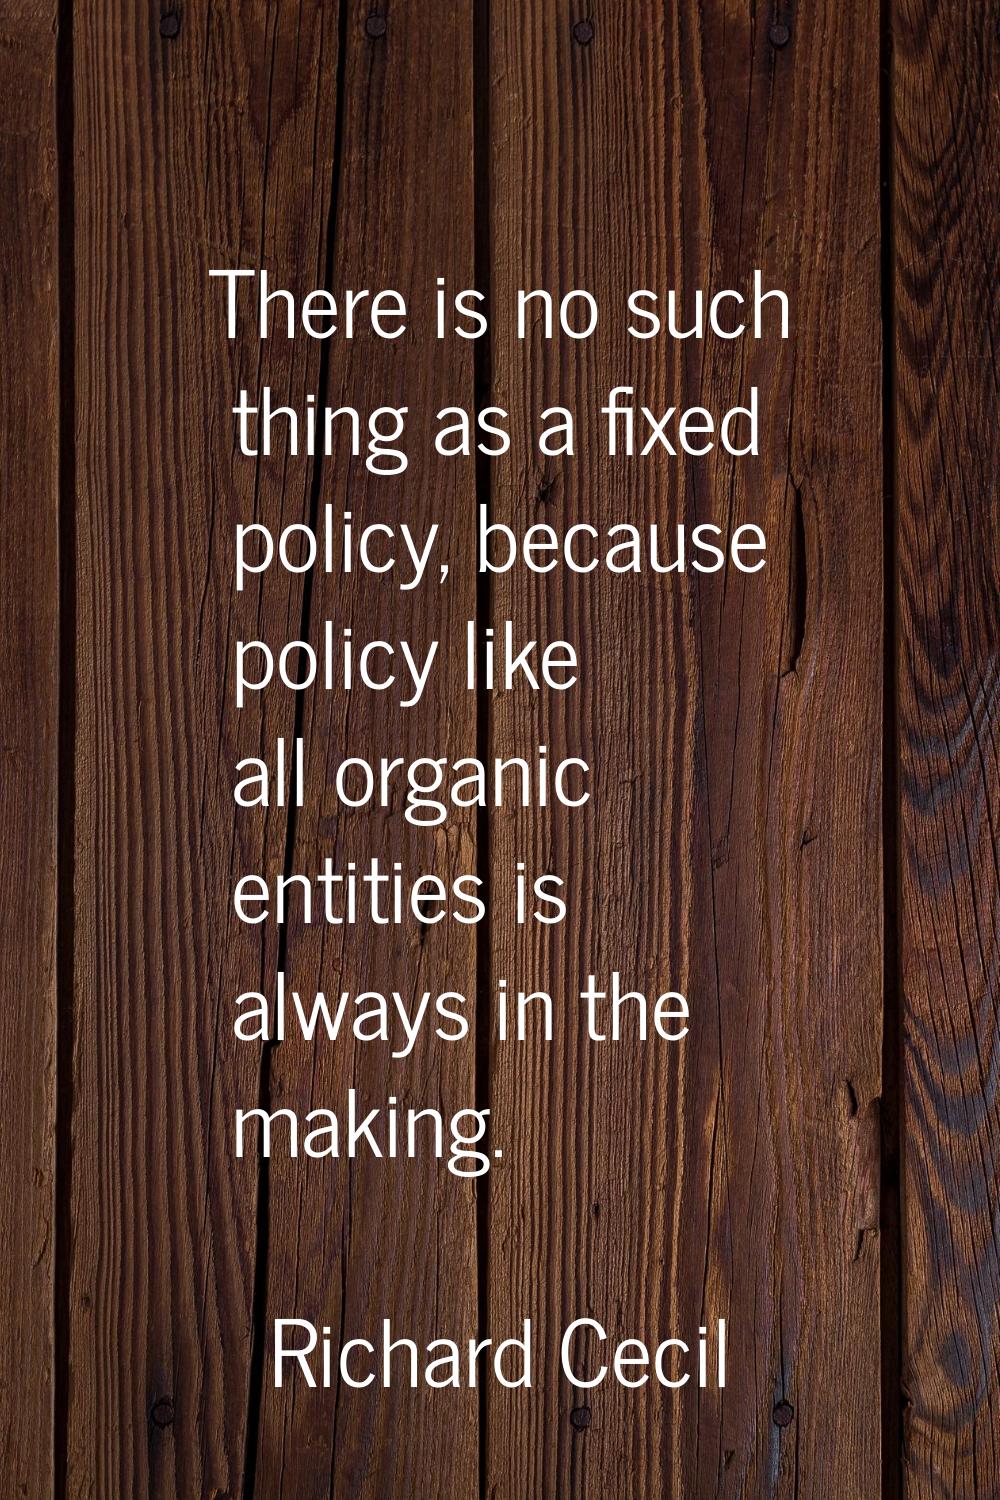 There is no such thing as a fixed policy, because policy like all organic entities is always in the